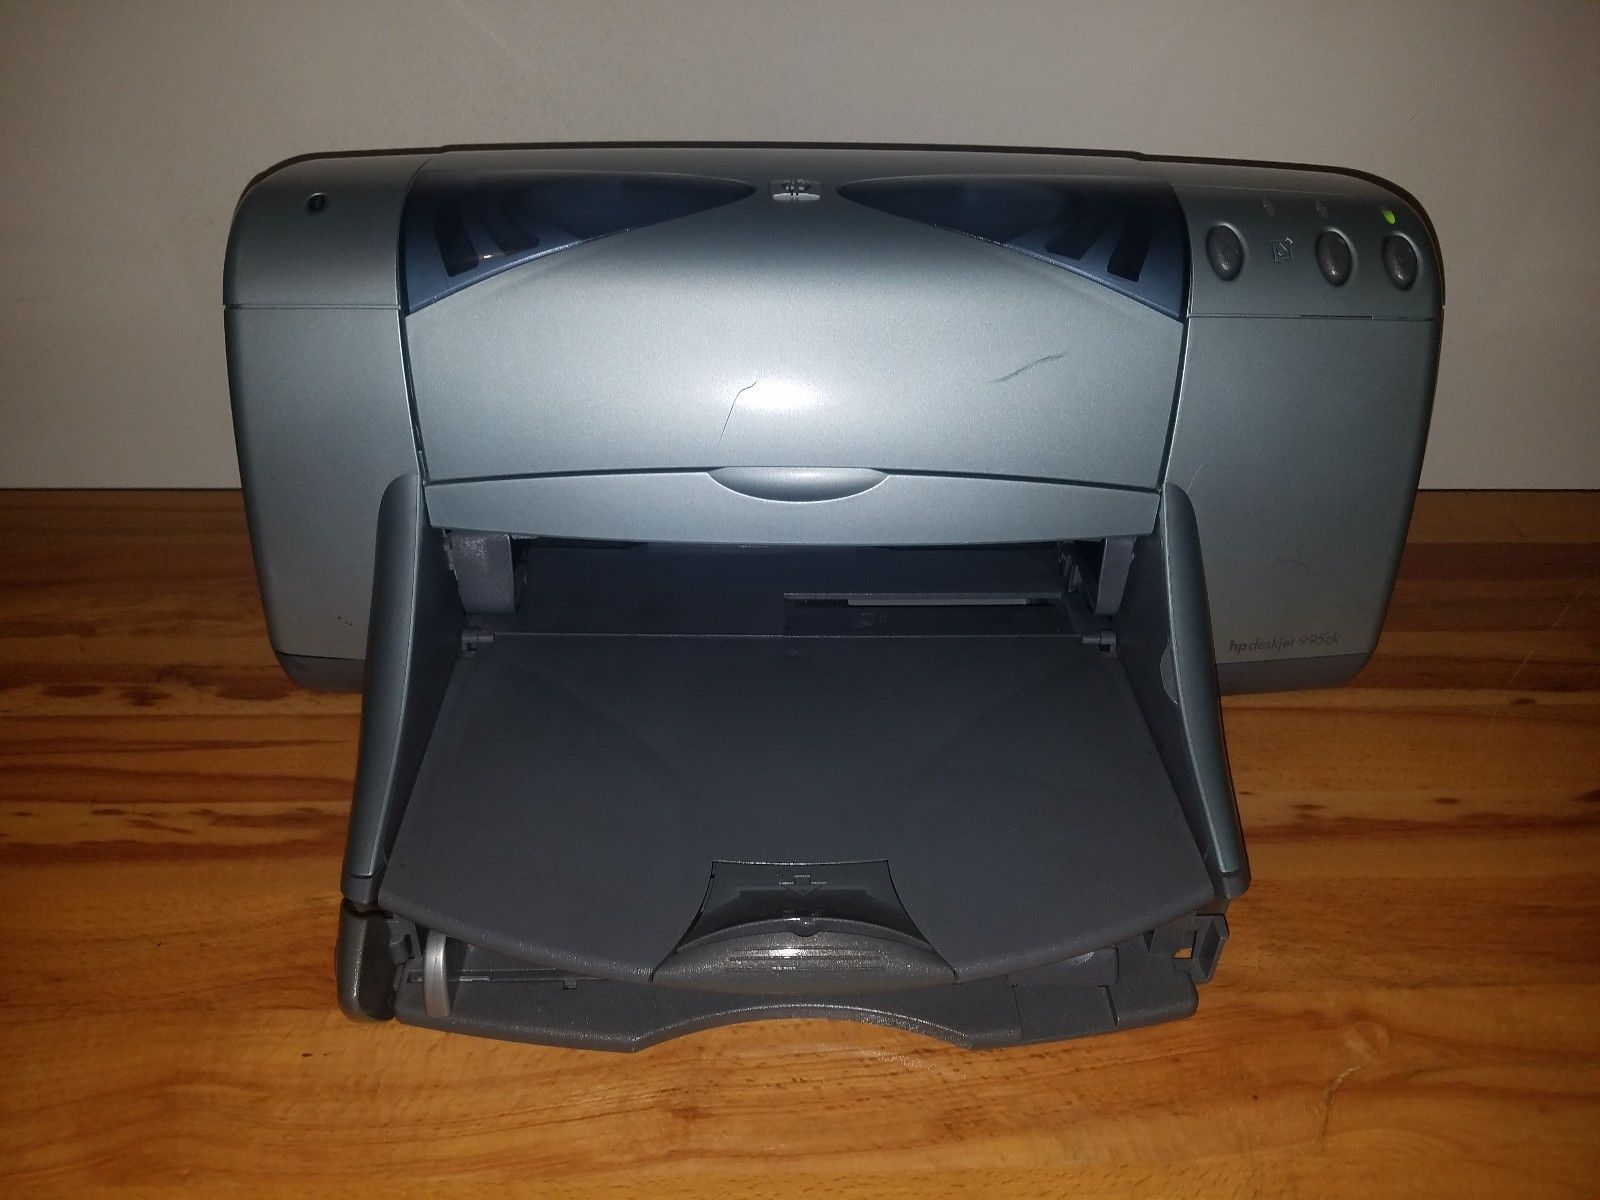 download hp office jet 4500 wireless printer for mac